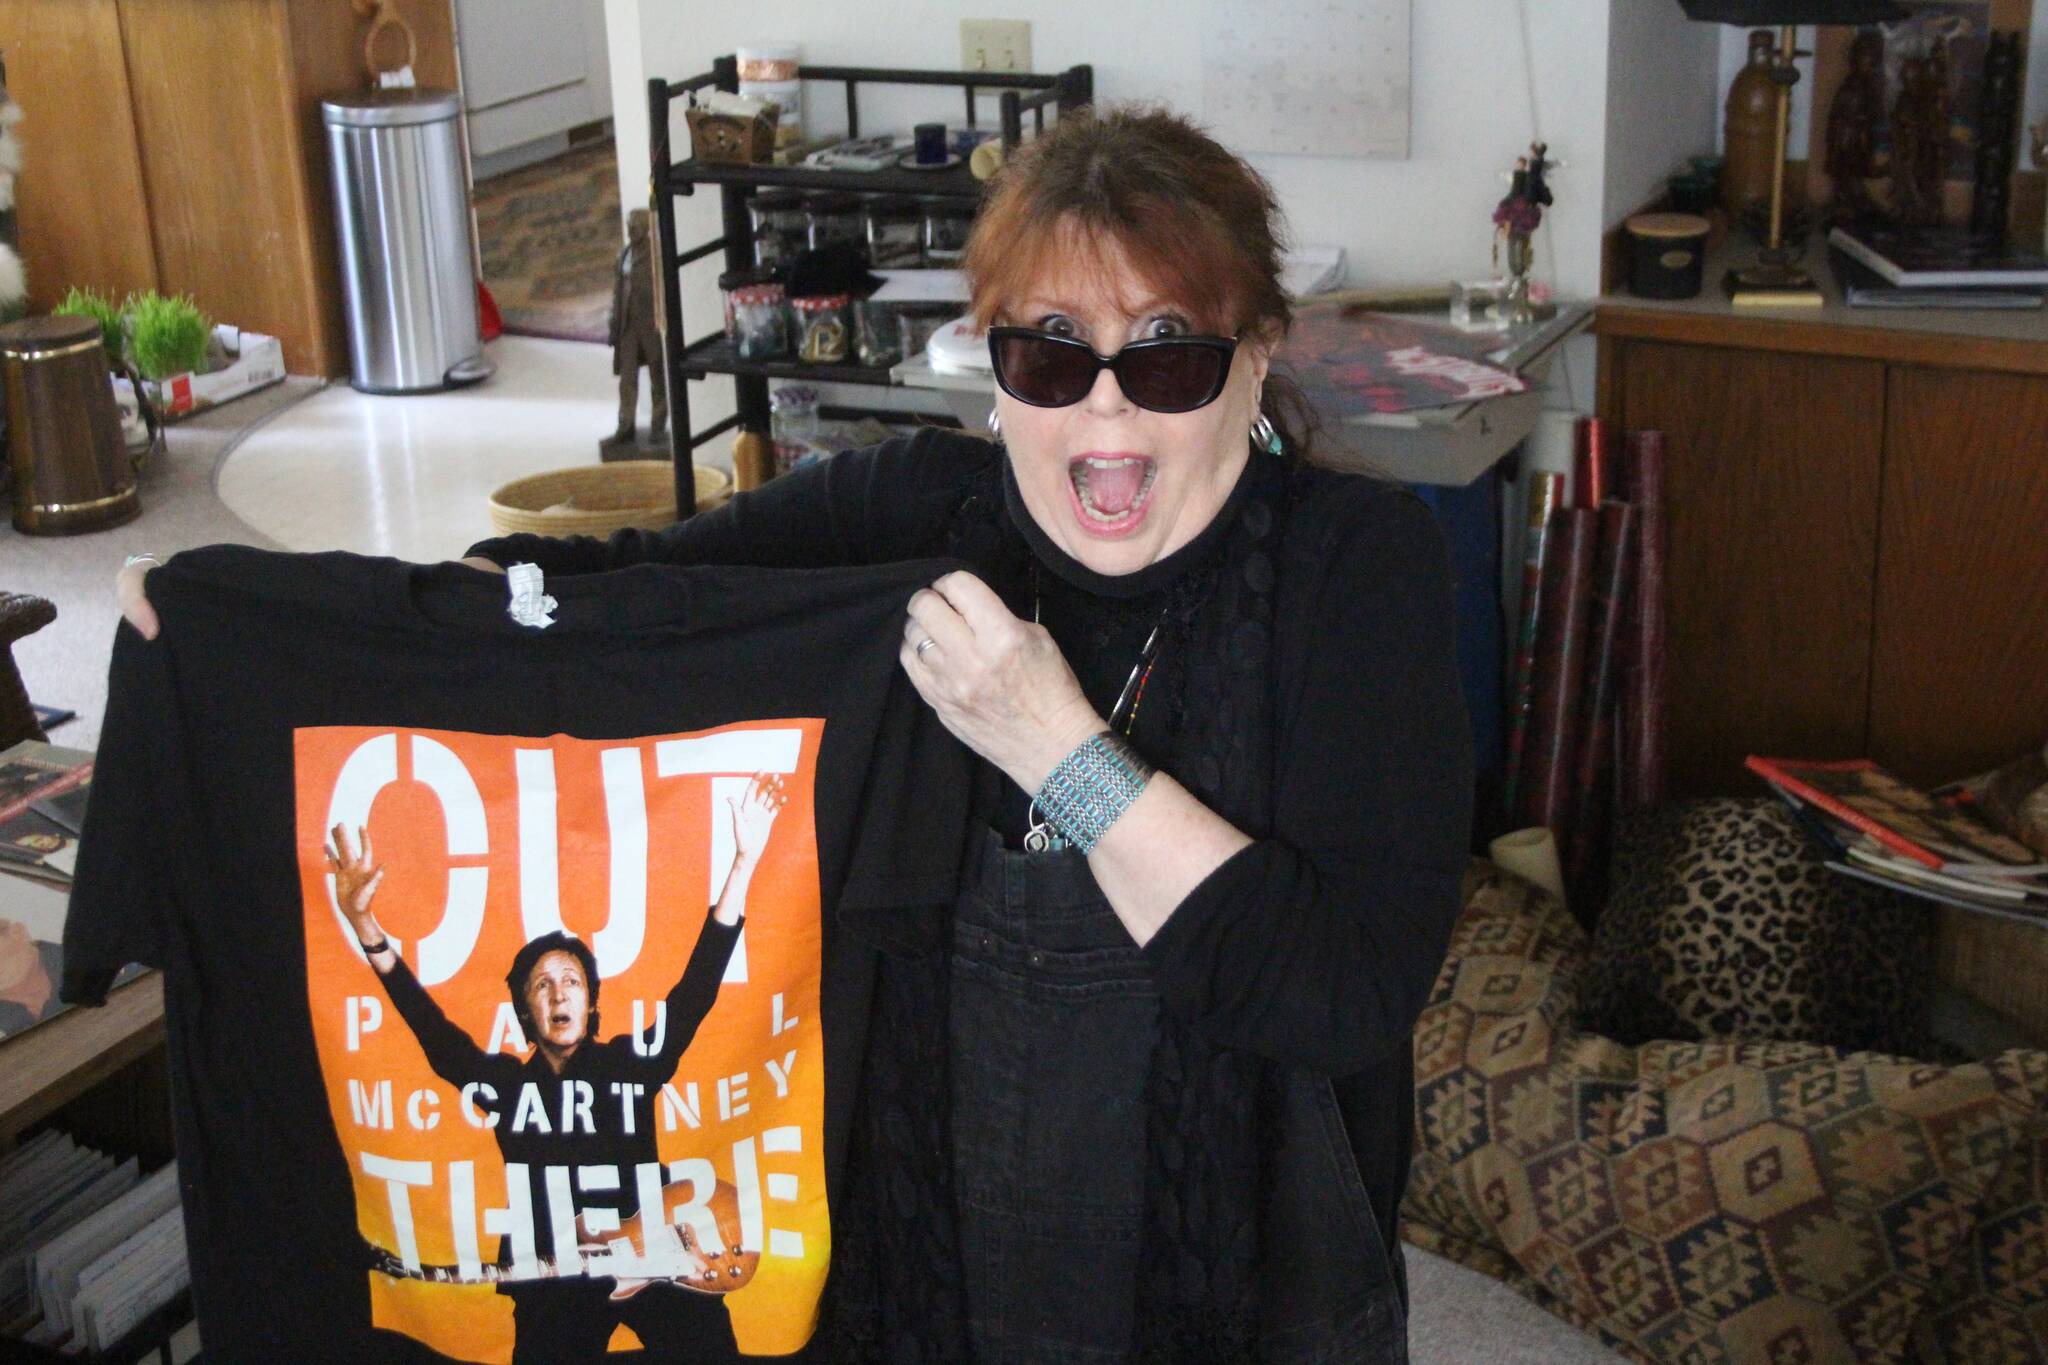 Heather Spaulding / Staff photo
Carol Maas excitedly showing off her Paul McCartney concert t-shirt